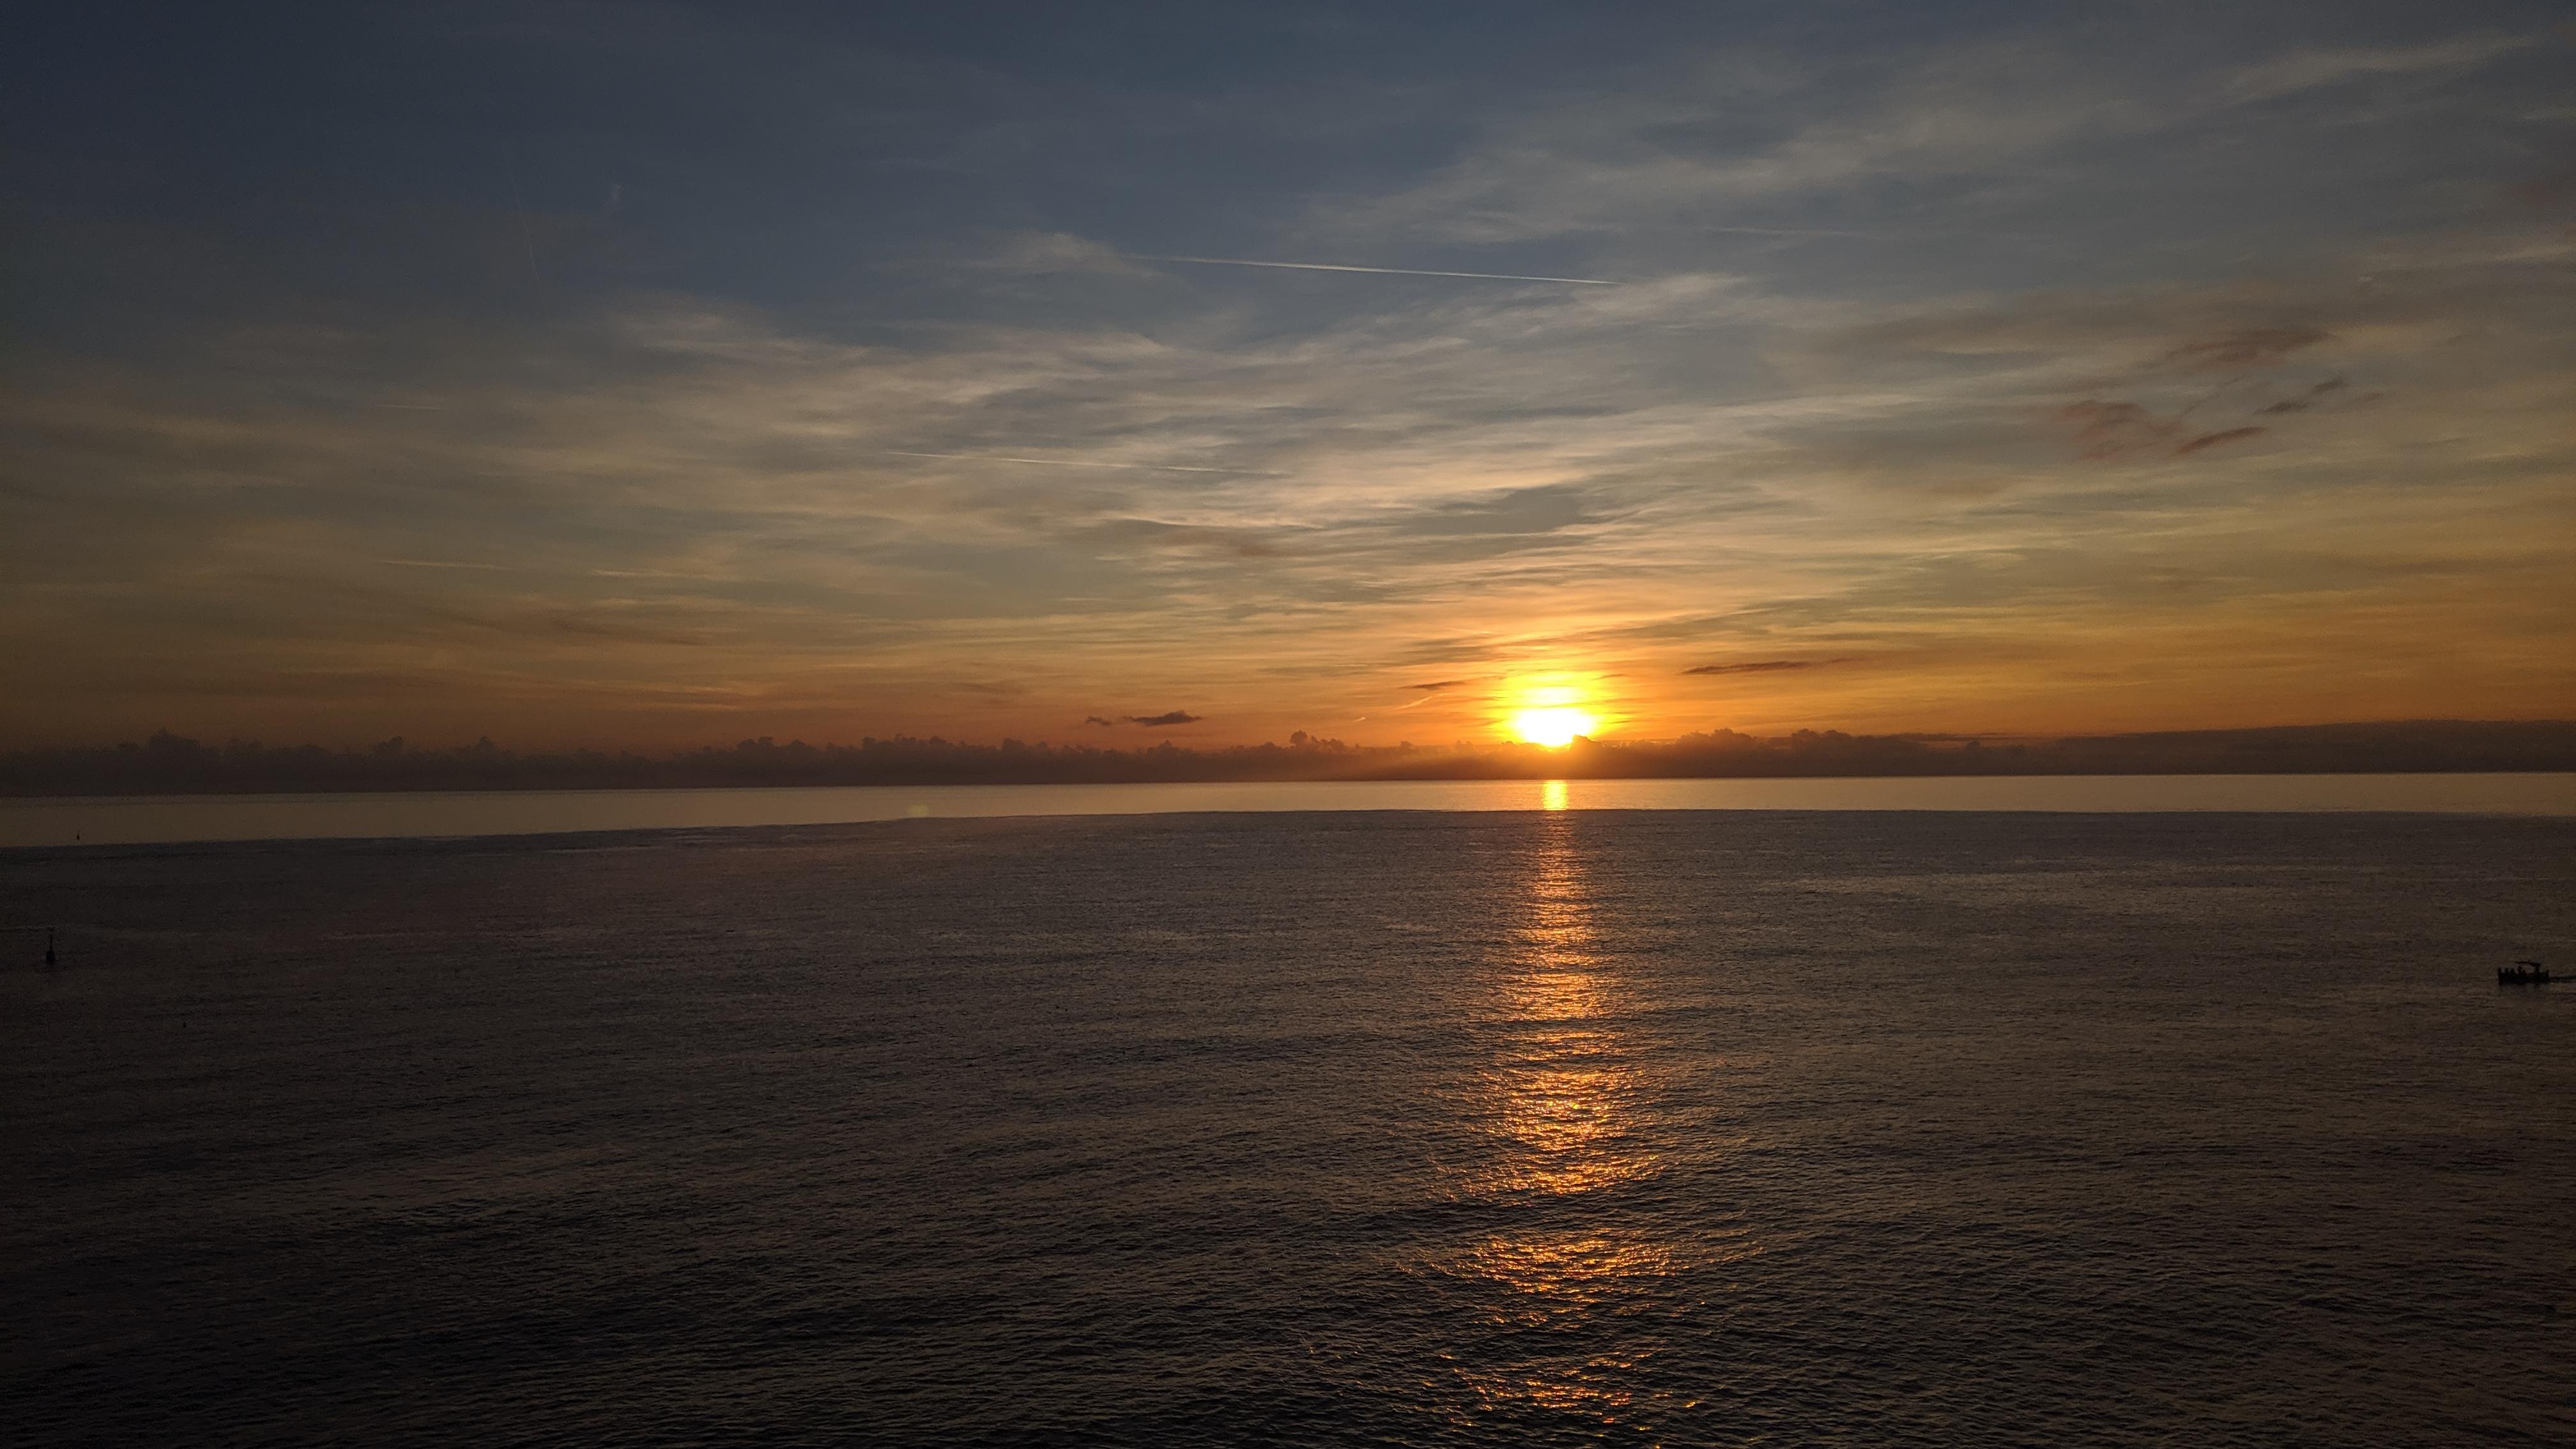 A photograph of sunset over the Mediterranean.